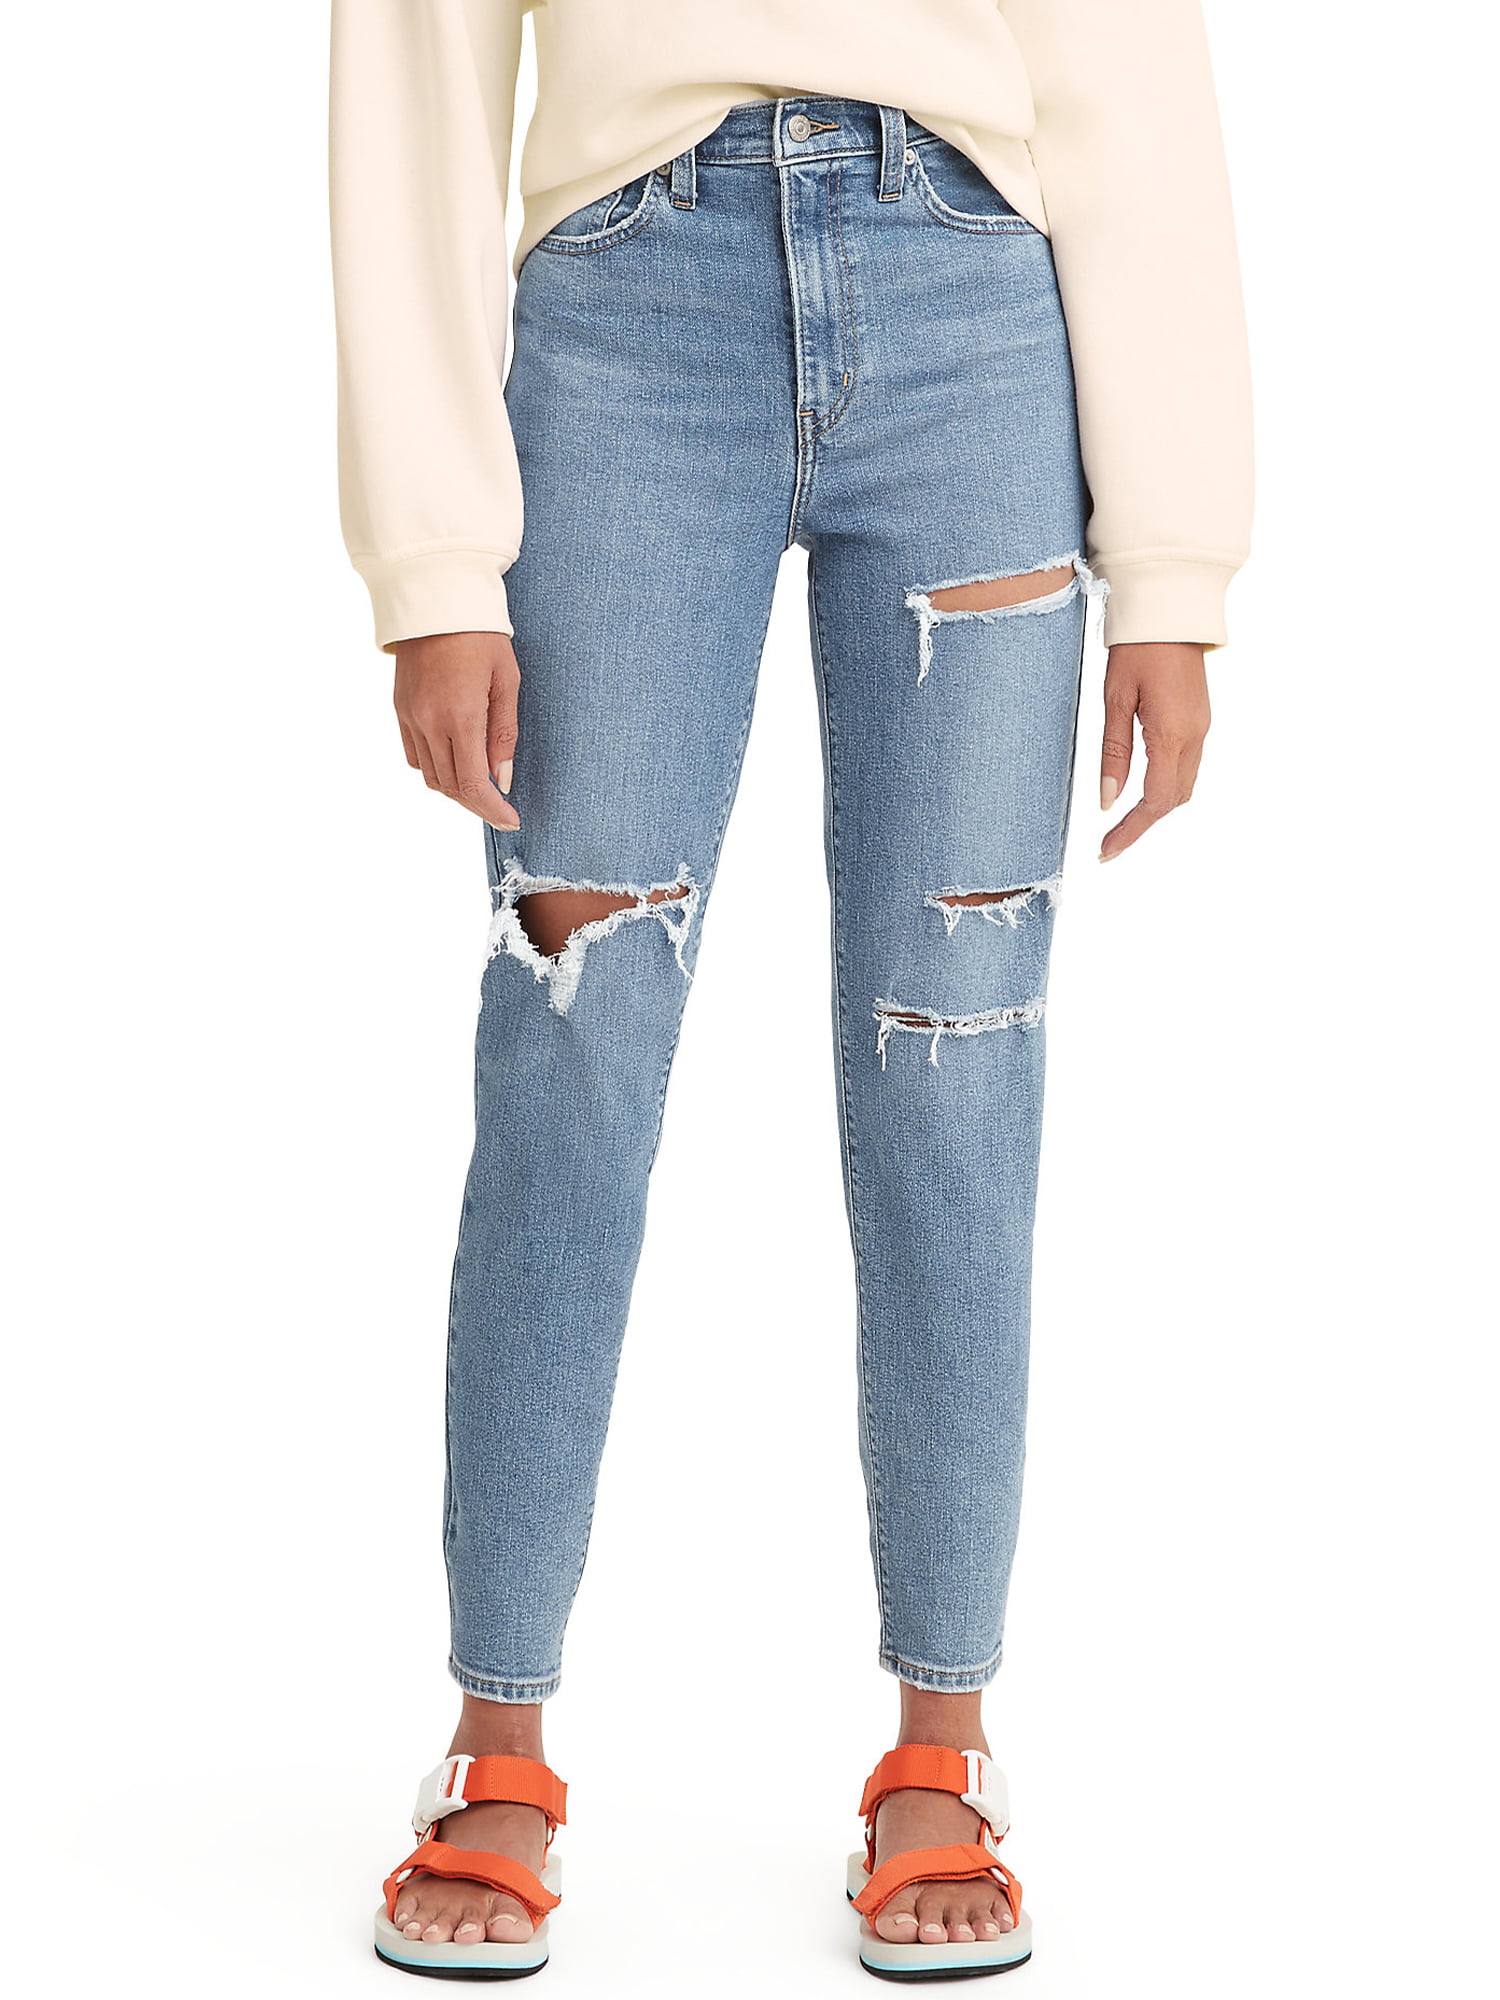 Levi Women's High Rise Mom Jeans - Fun Mom (Mid Wash Deconstructed)